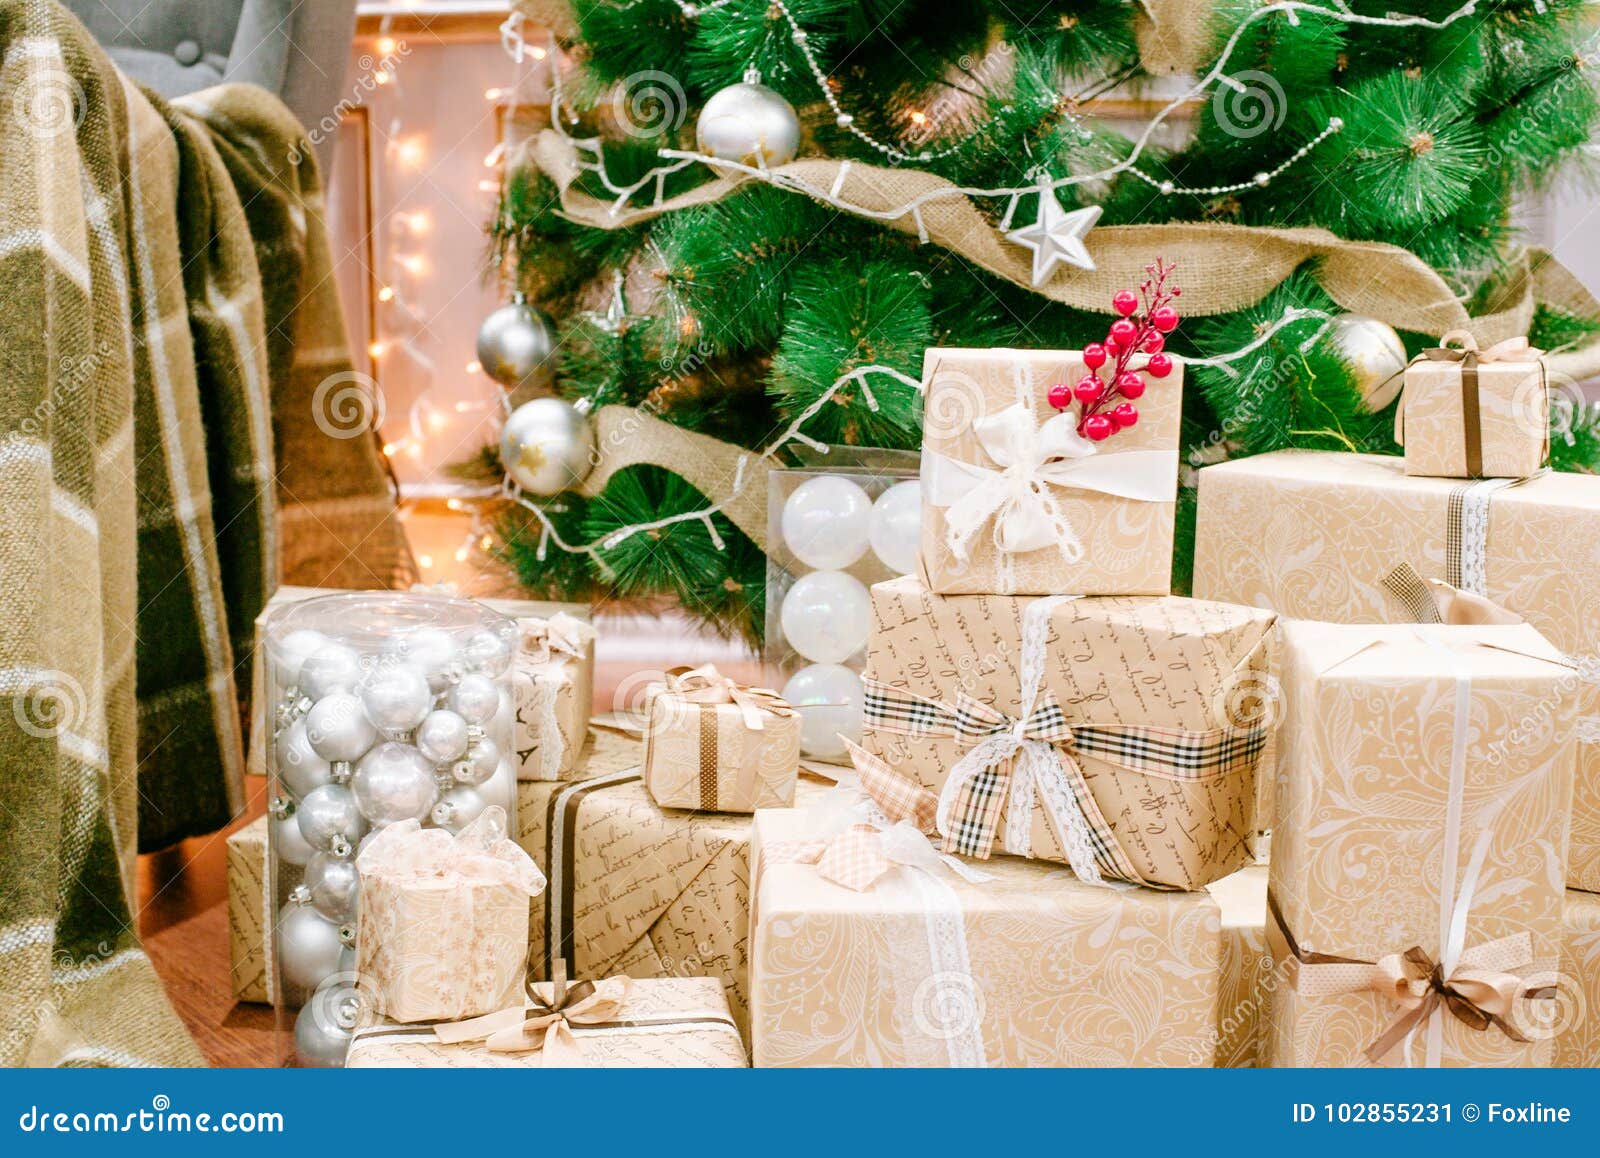 Download Presents Under Christmas Tree In Living Room Stock Image Image of december light